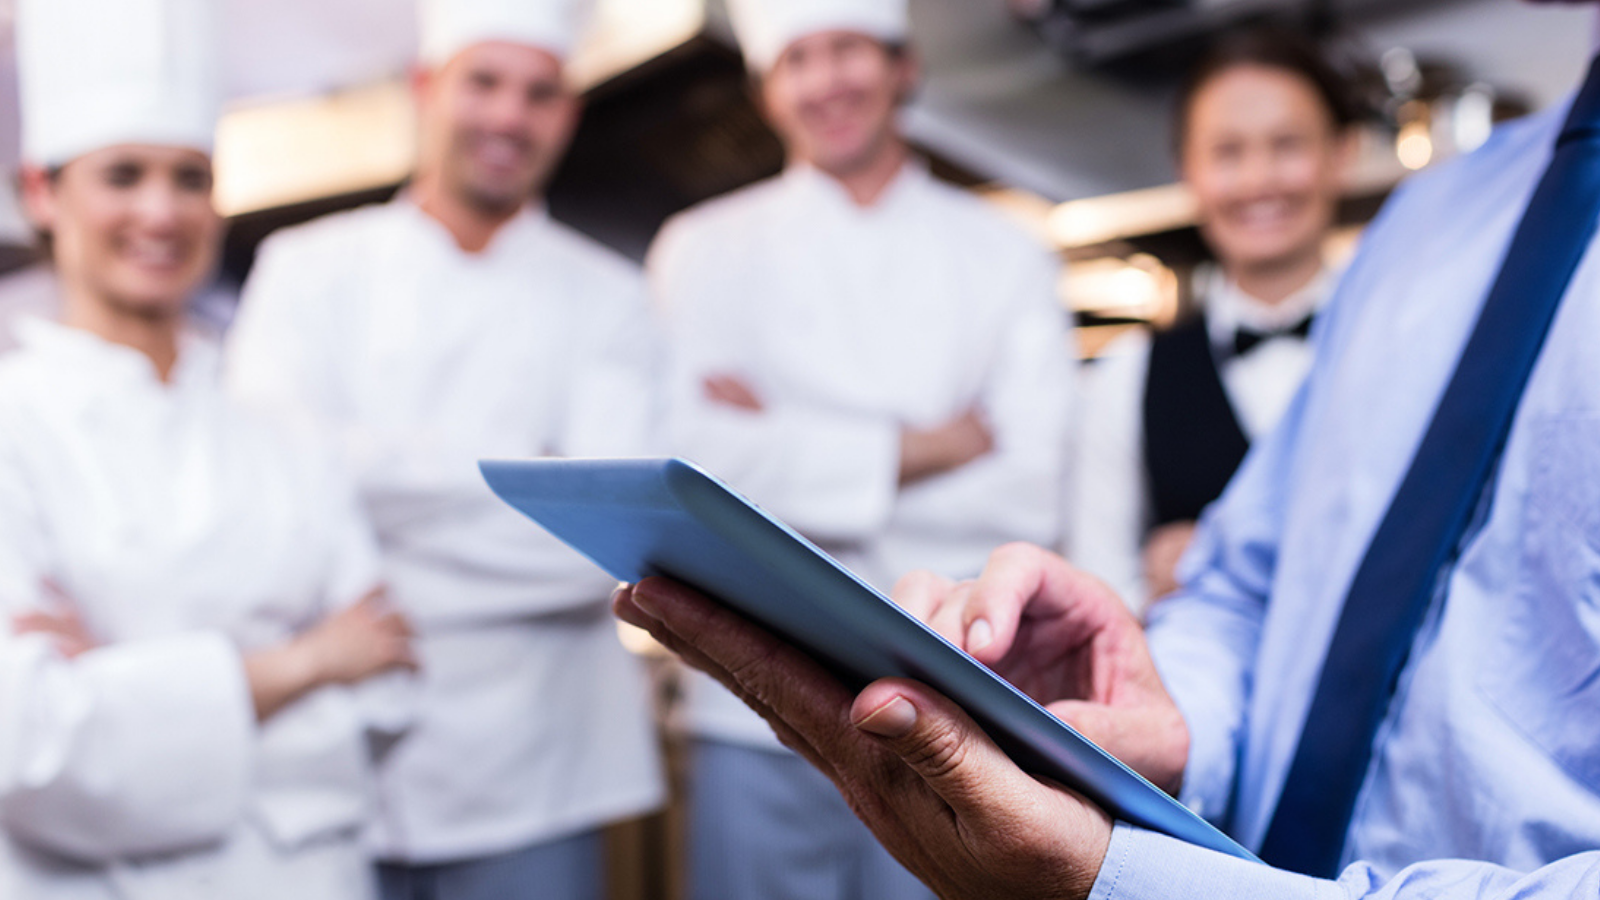 How to Improve Restaurant Inspections with Mobile Forms